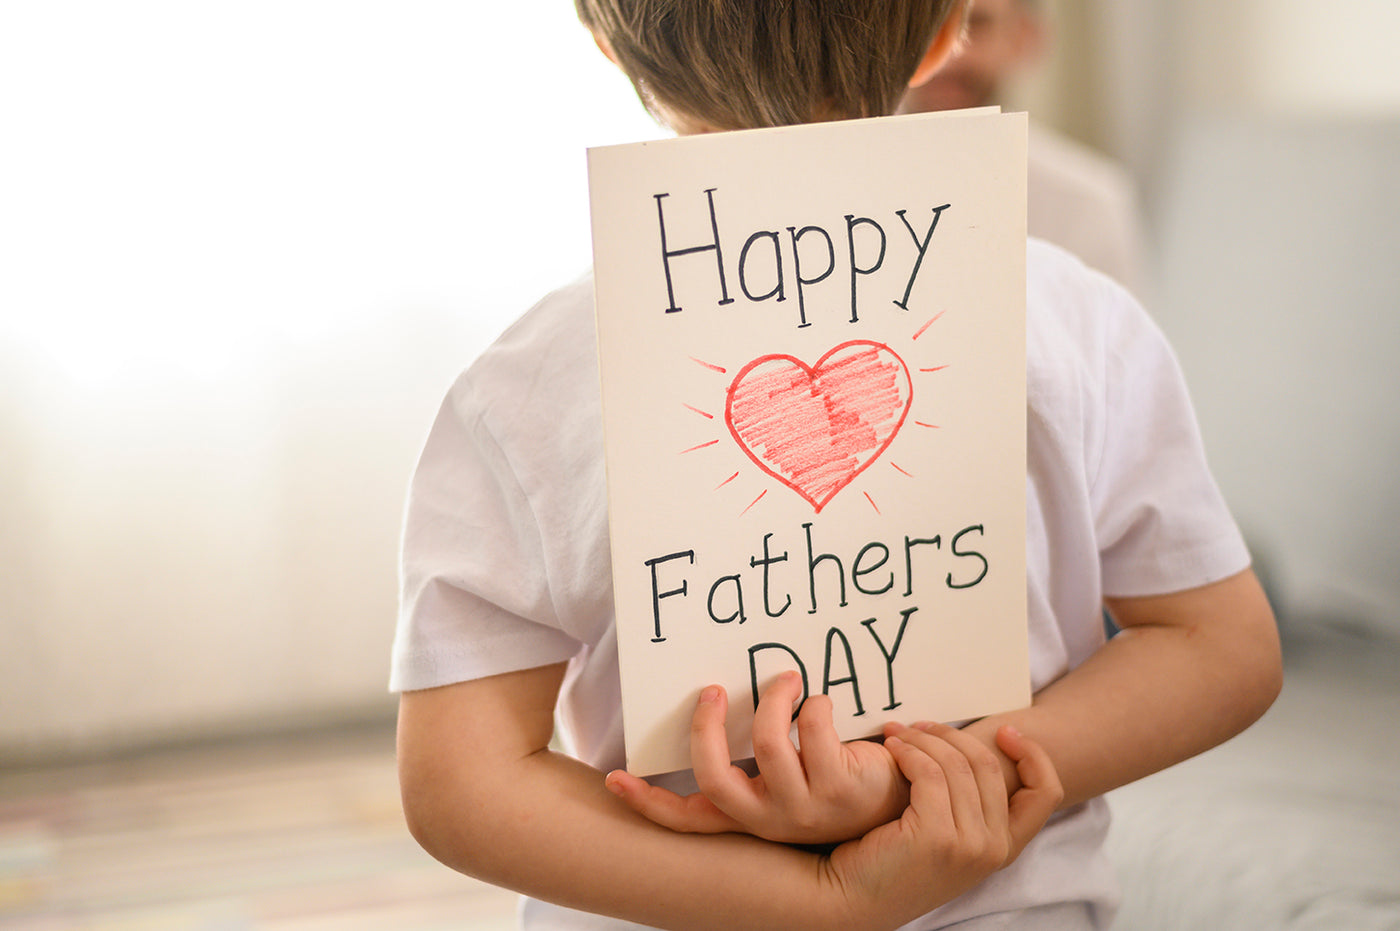 UK consumers spend approx. £799m on Father's Day